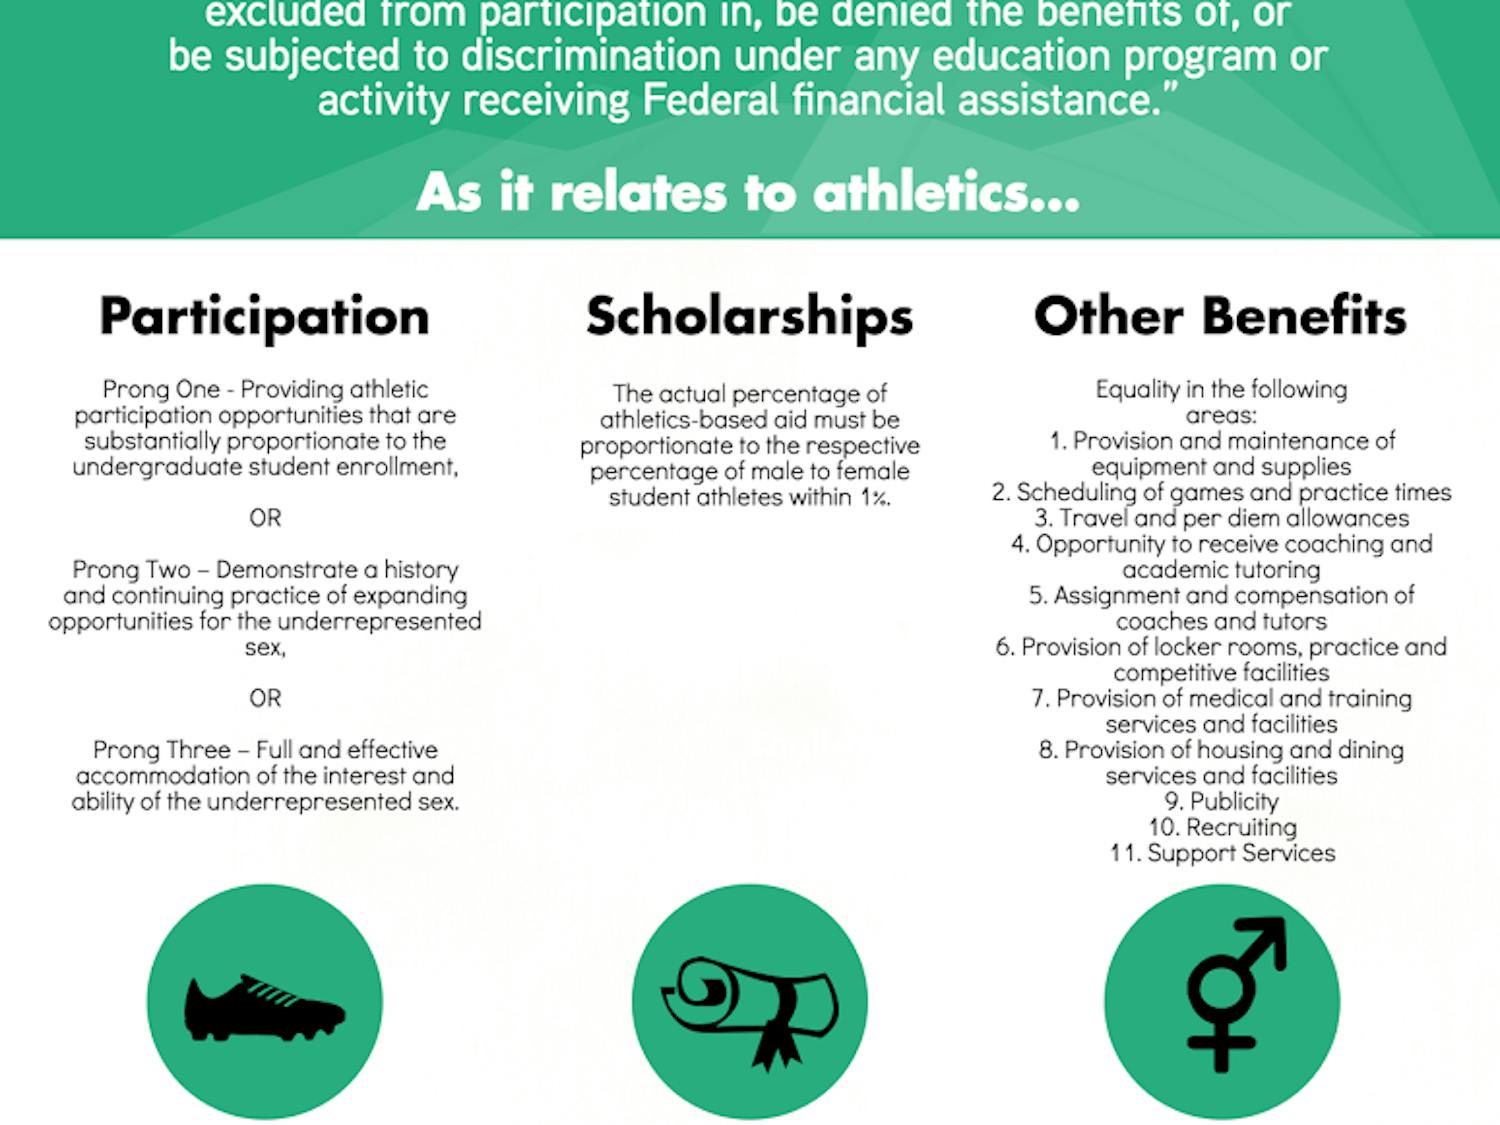 Source: "Administration of Intercollegiate Athletics"&nbsp;by Erianne Weight and Robert Zullo.